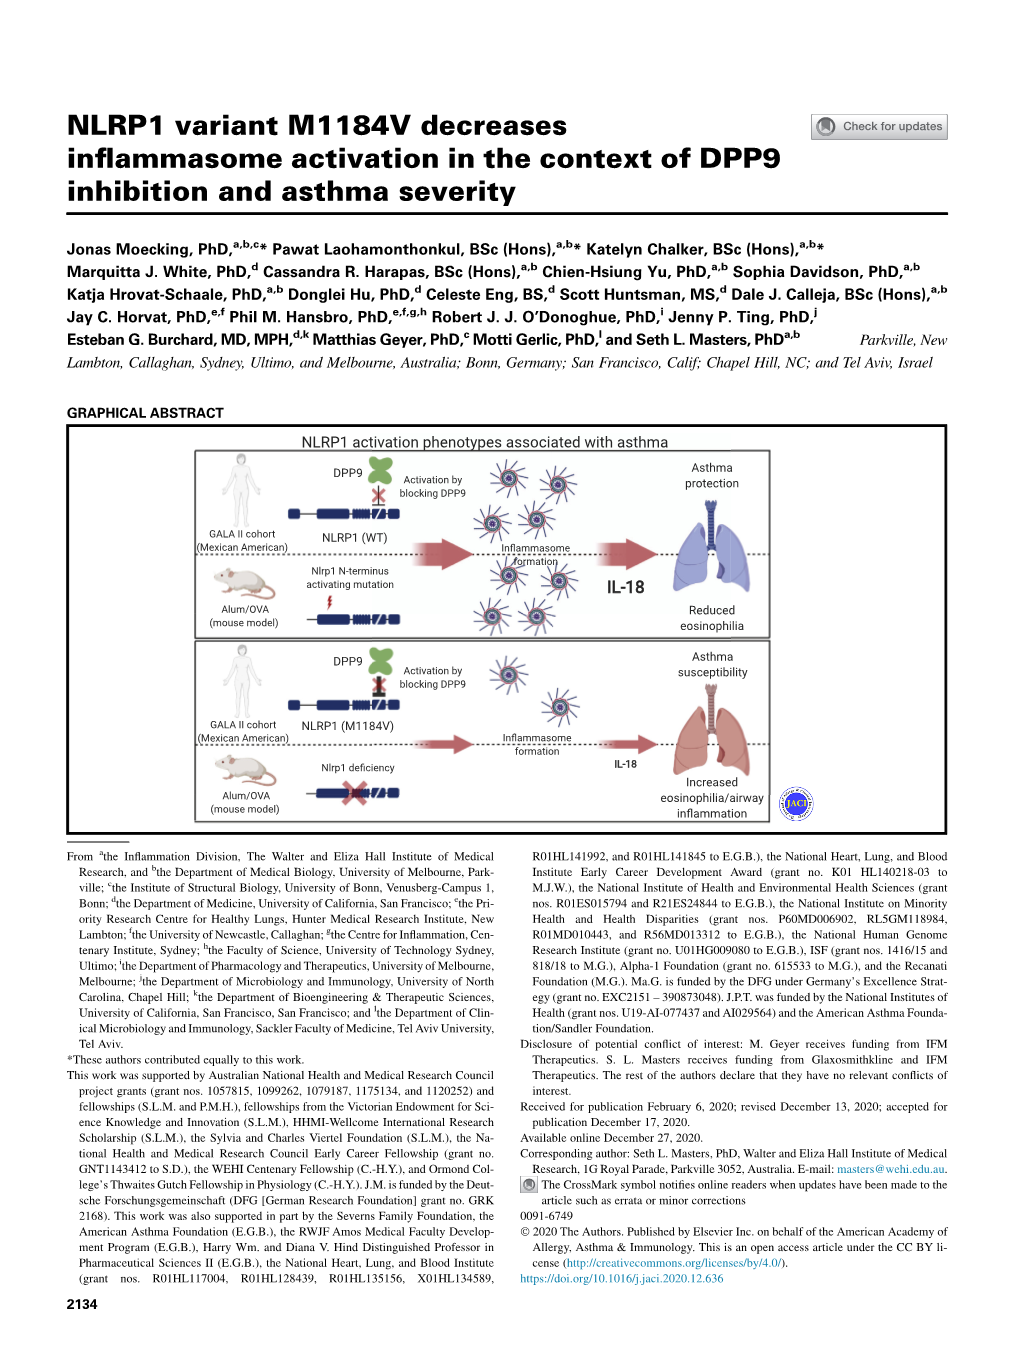 NLRP1 Variant M1184V Decreases Inflammasome Activation in the Context of DPP9 Inhibition and Asthma Severity